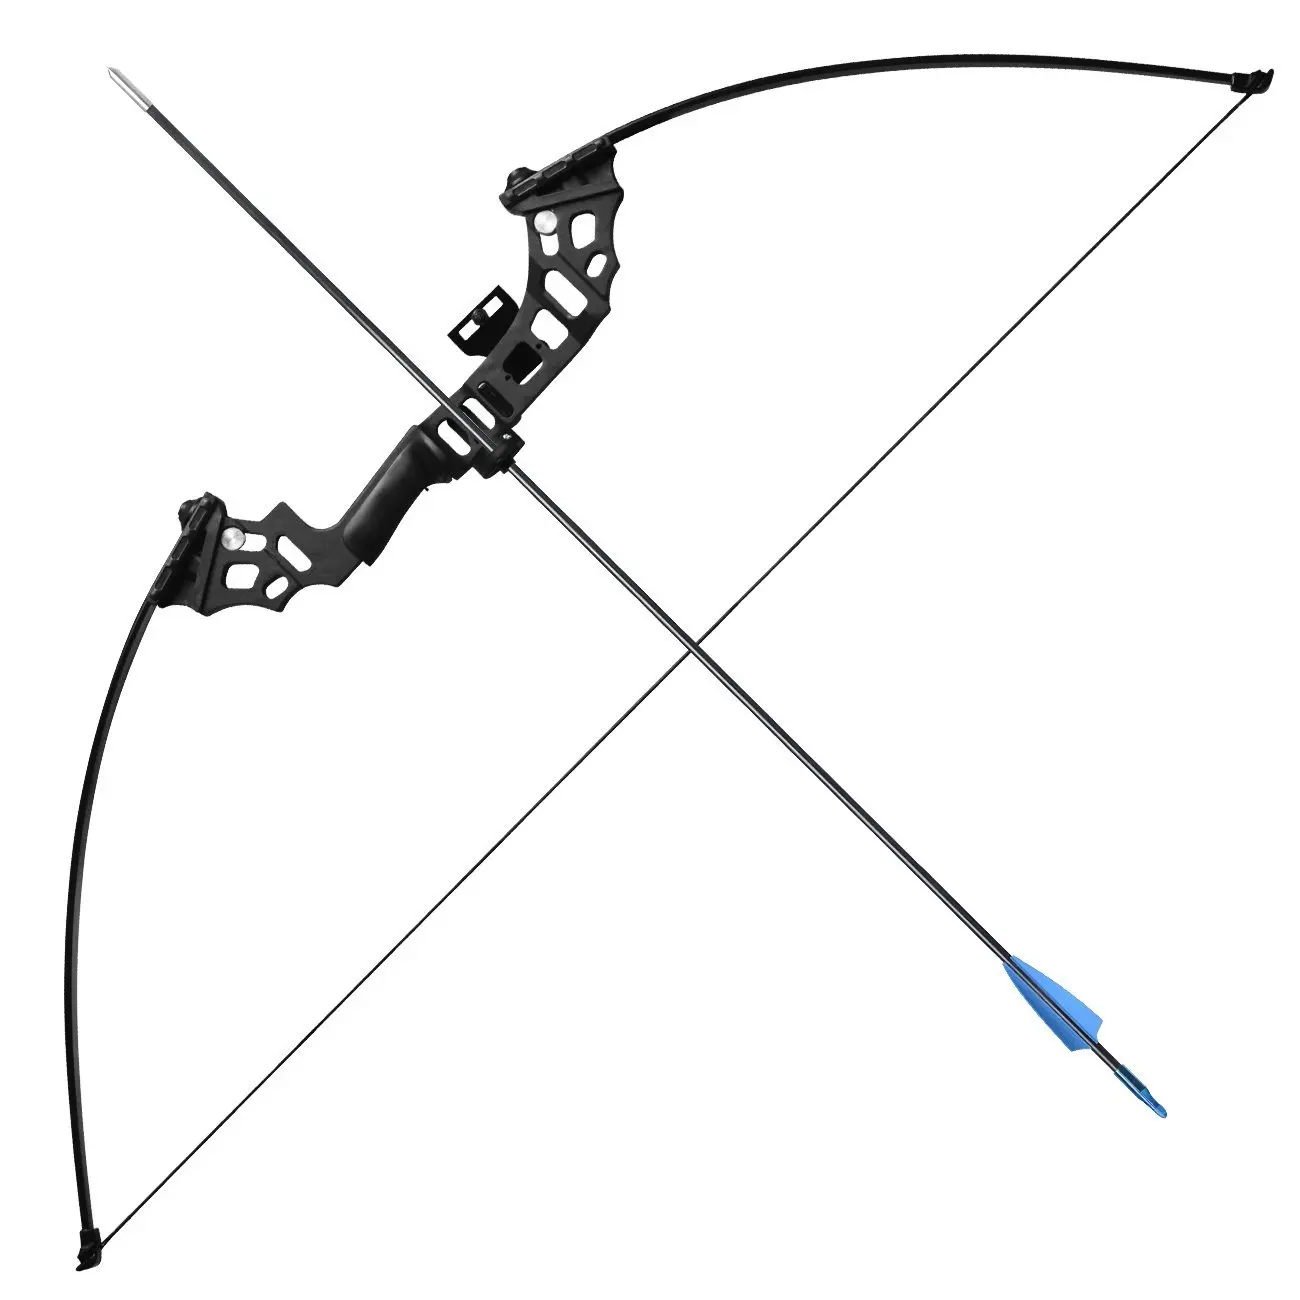 Cheap Used Archery Equipment For Sale 